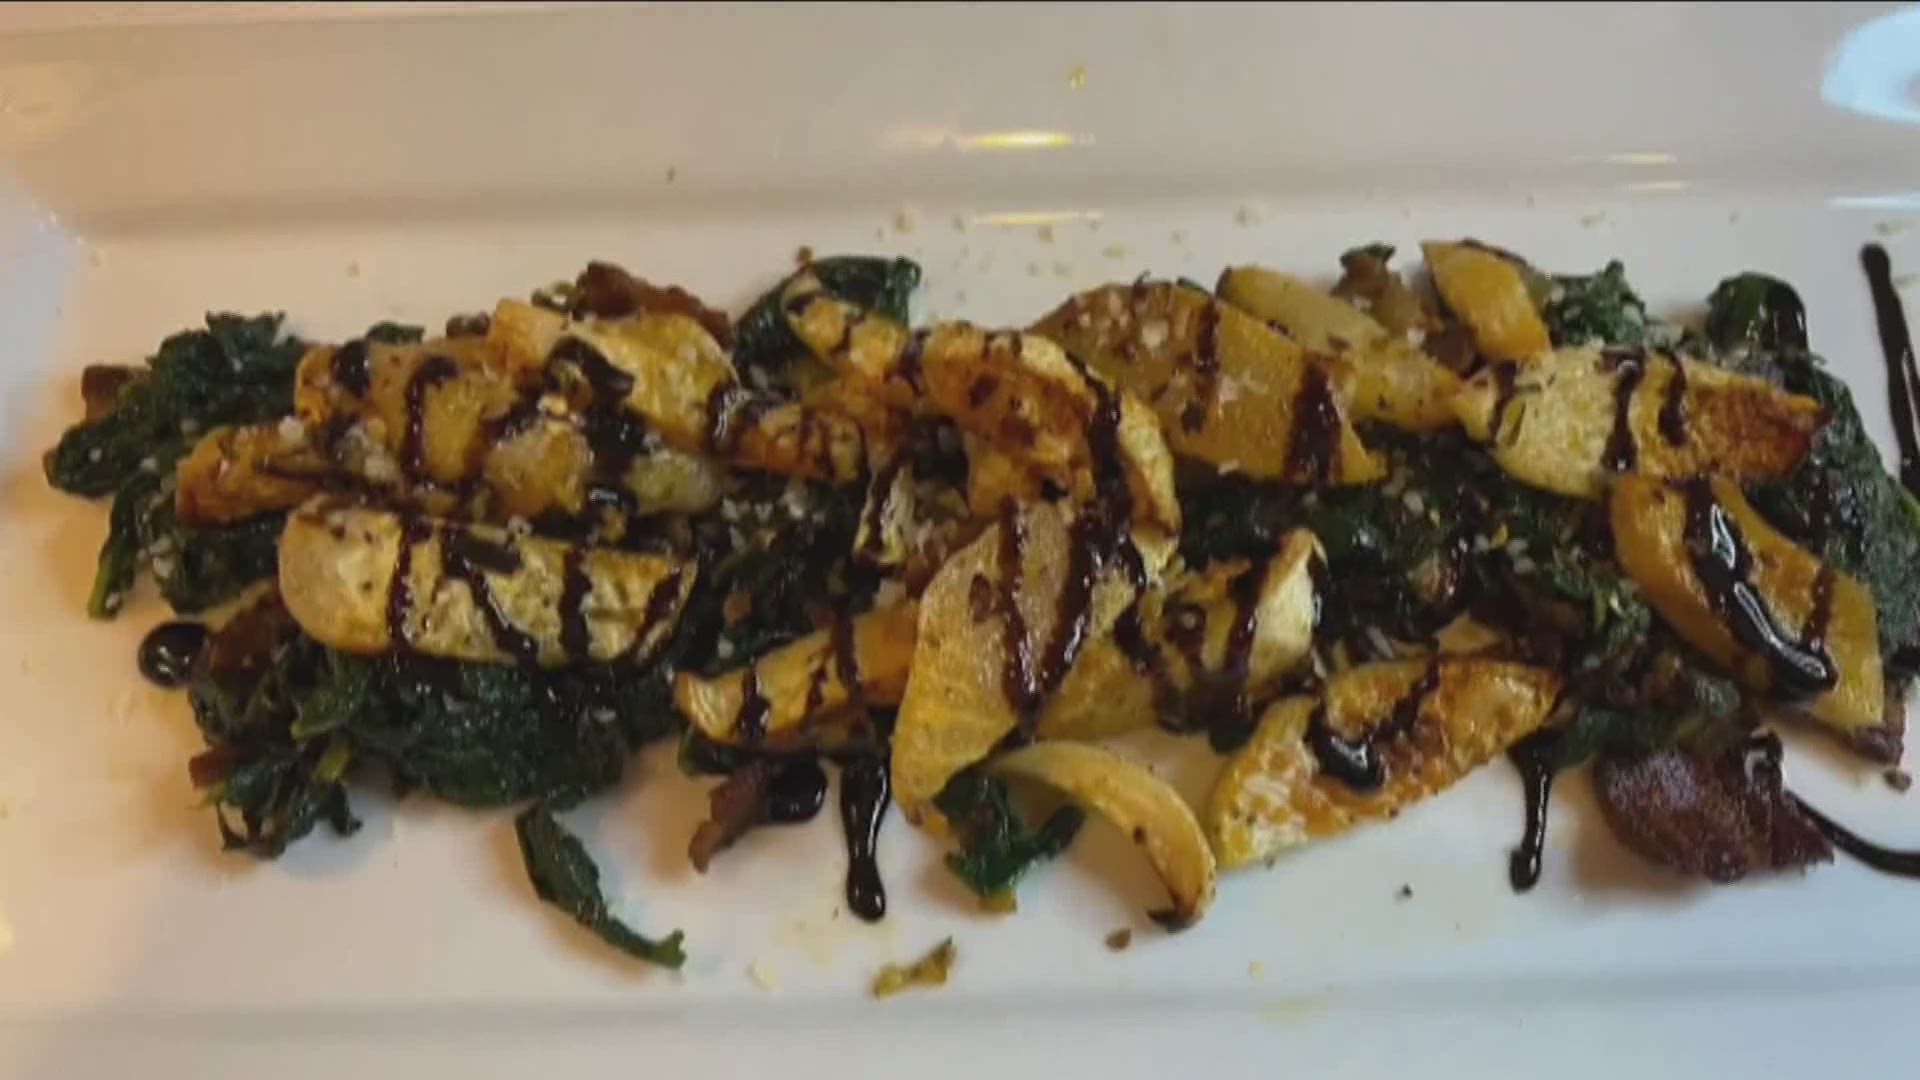 Chef Char turns up the flavor with this turnip recipe